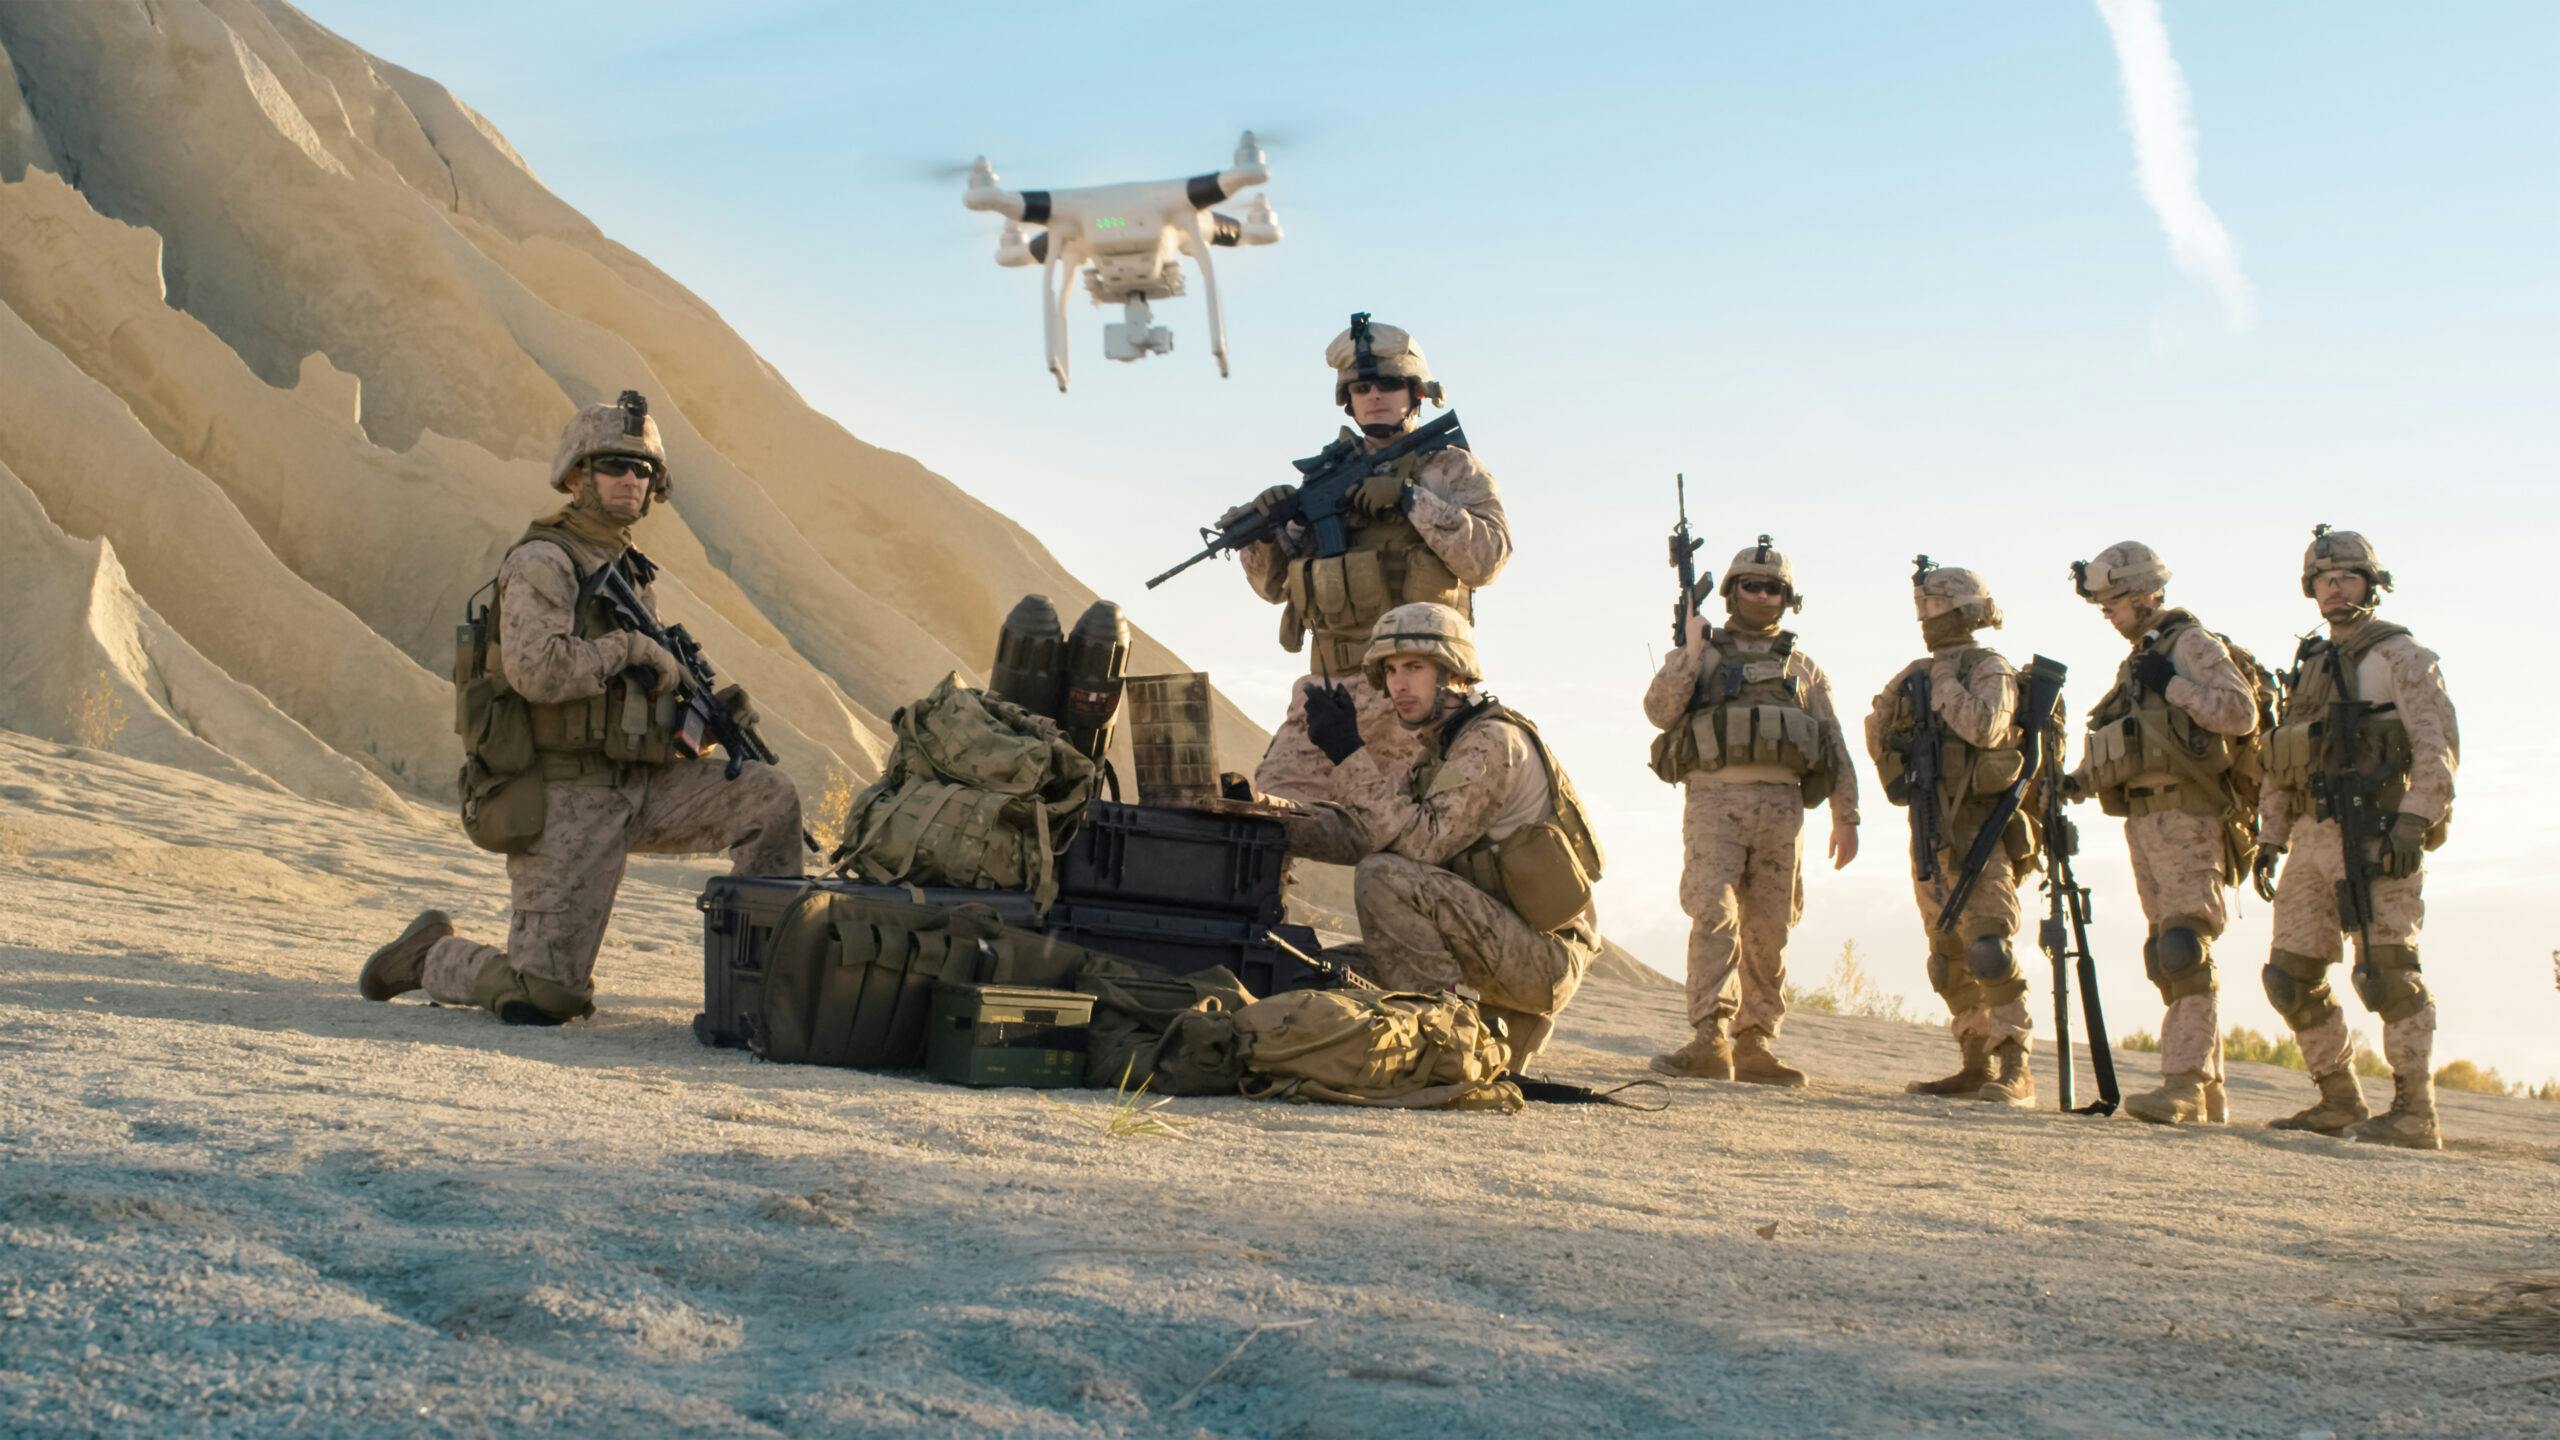 Image of soldiers in full tactical gear in the desert with a dron hovering overhead, gathered around a field laptop.